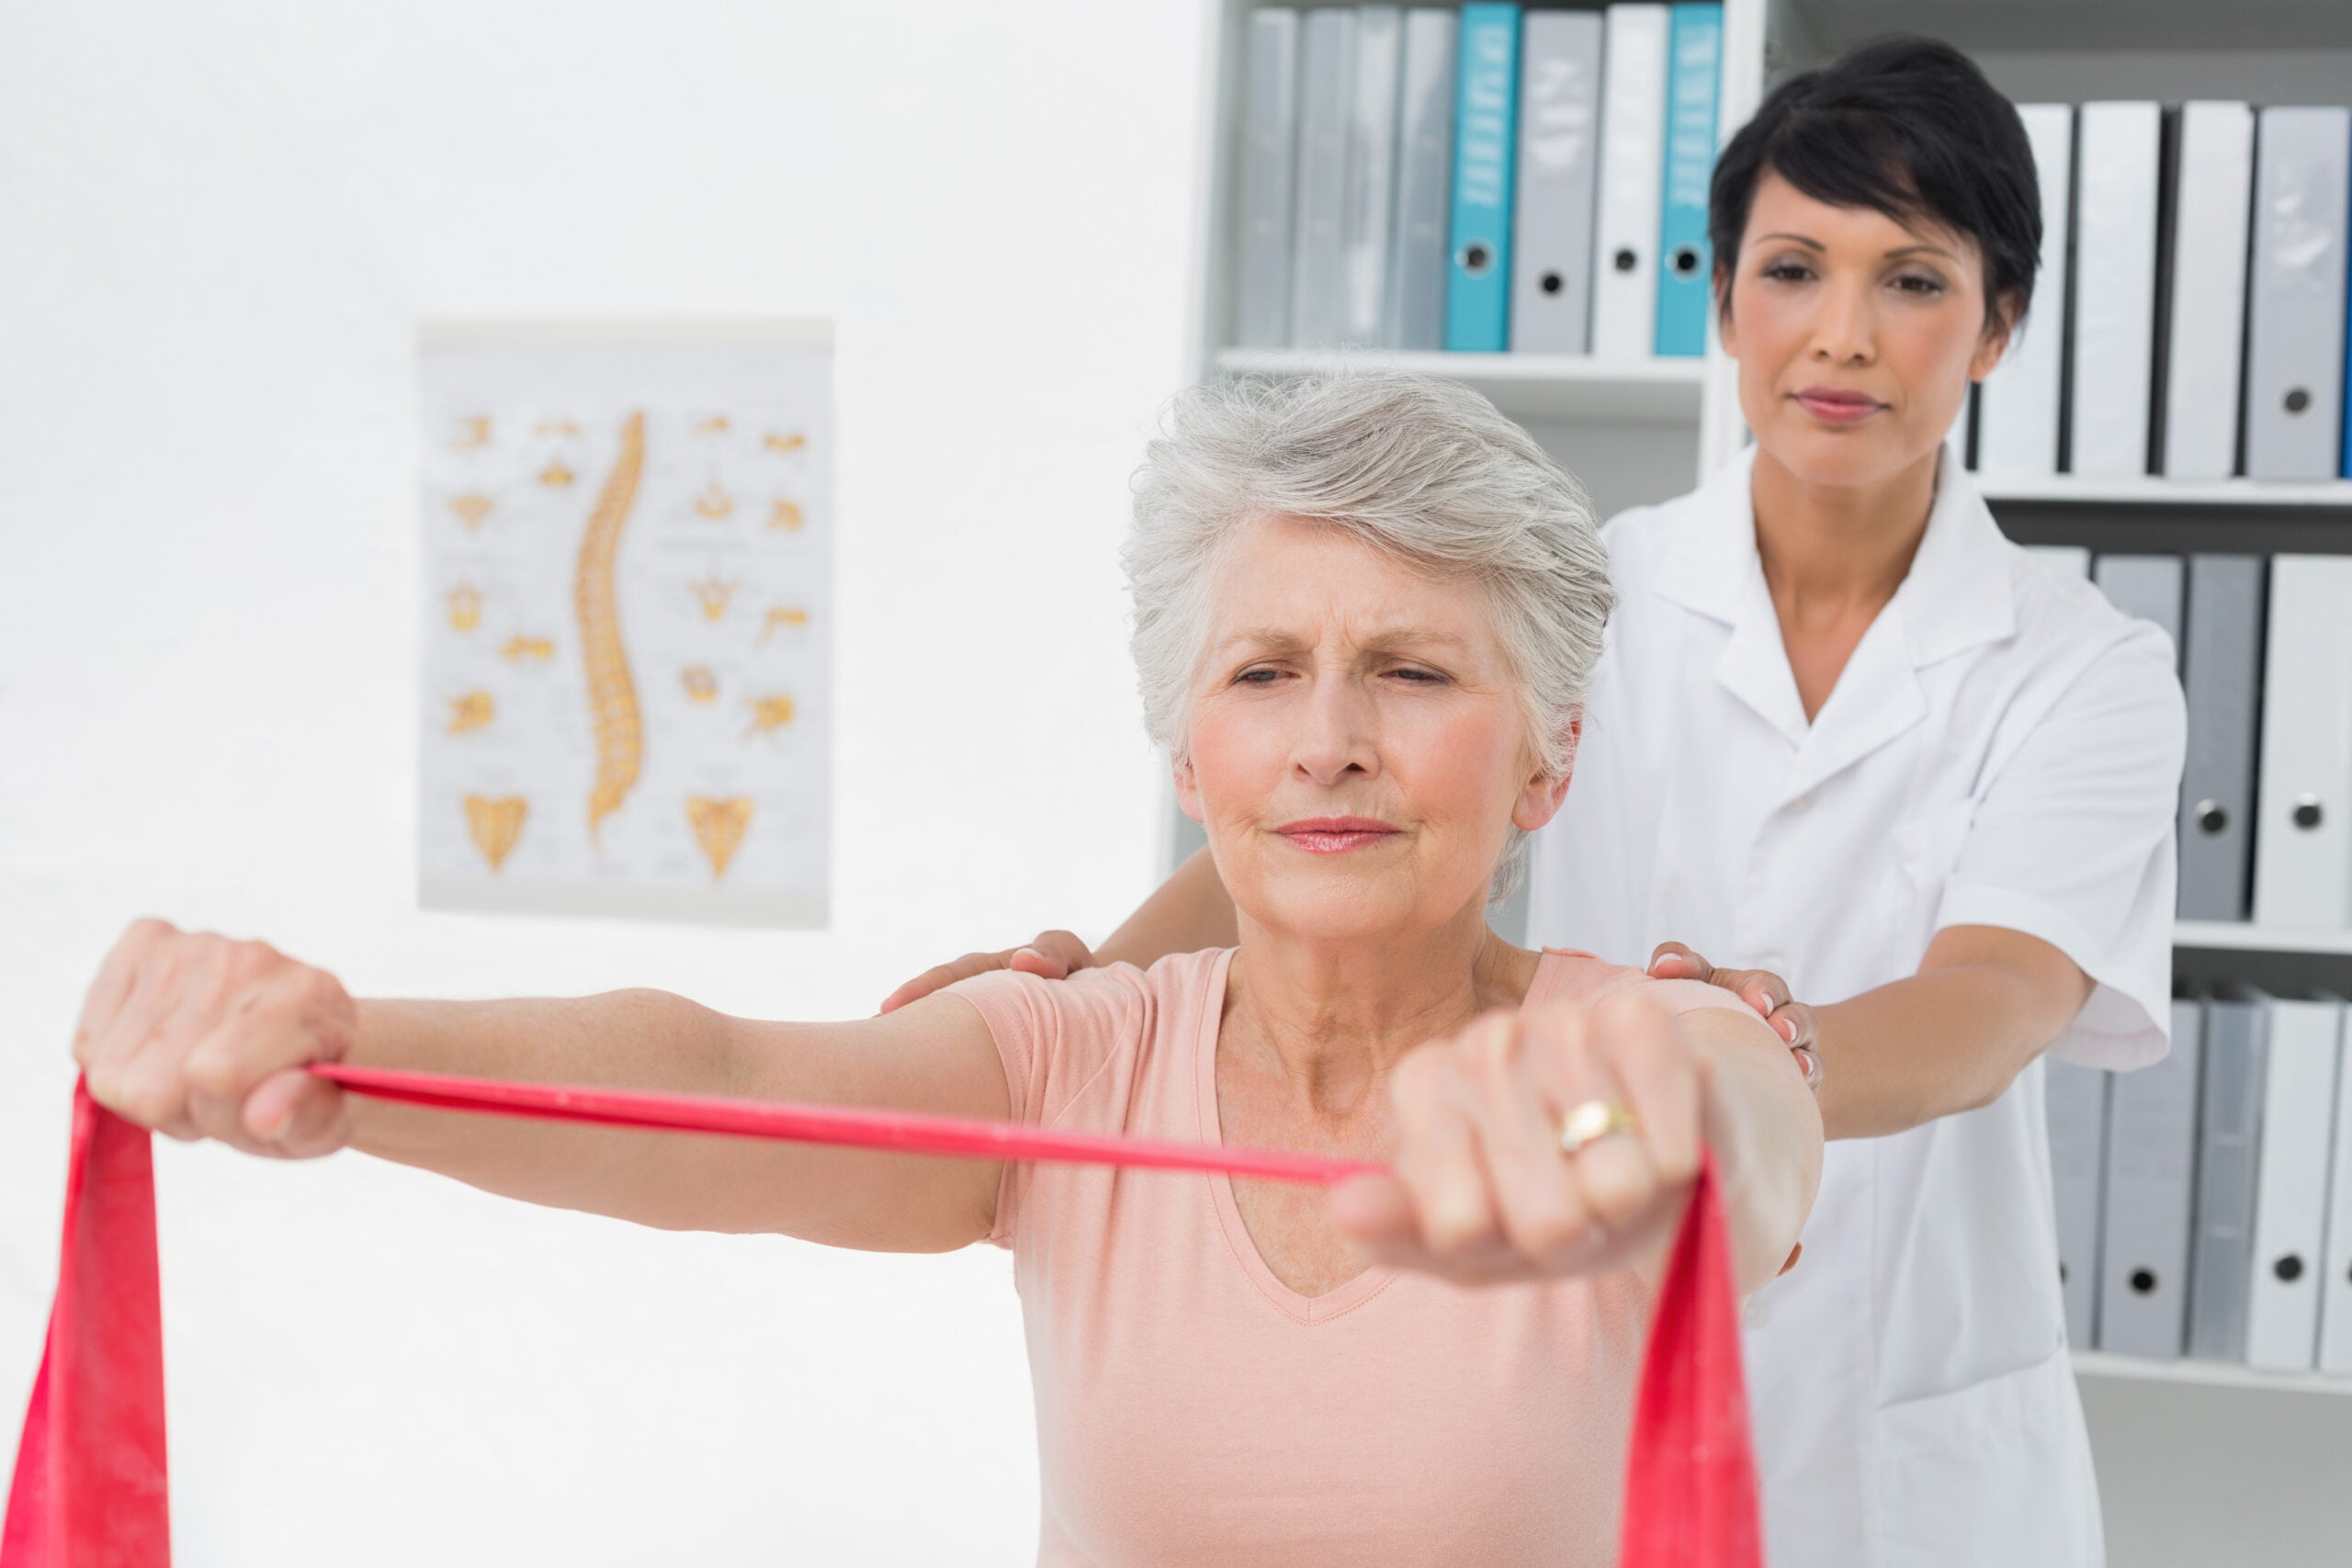 Osteoporosis and Bone Fractures: The Connection You Should Know About